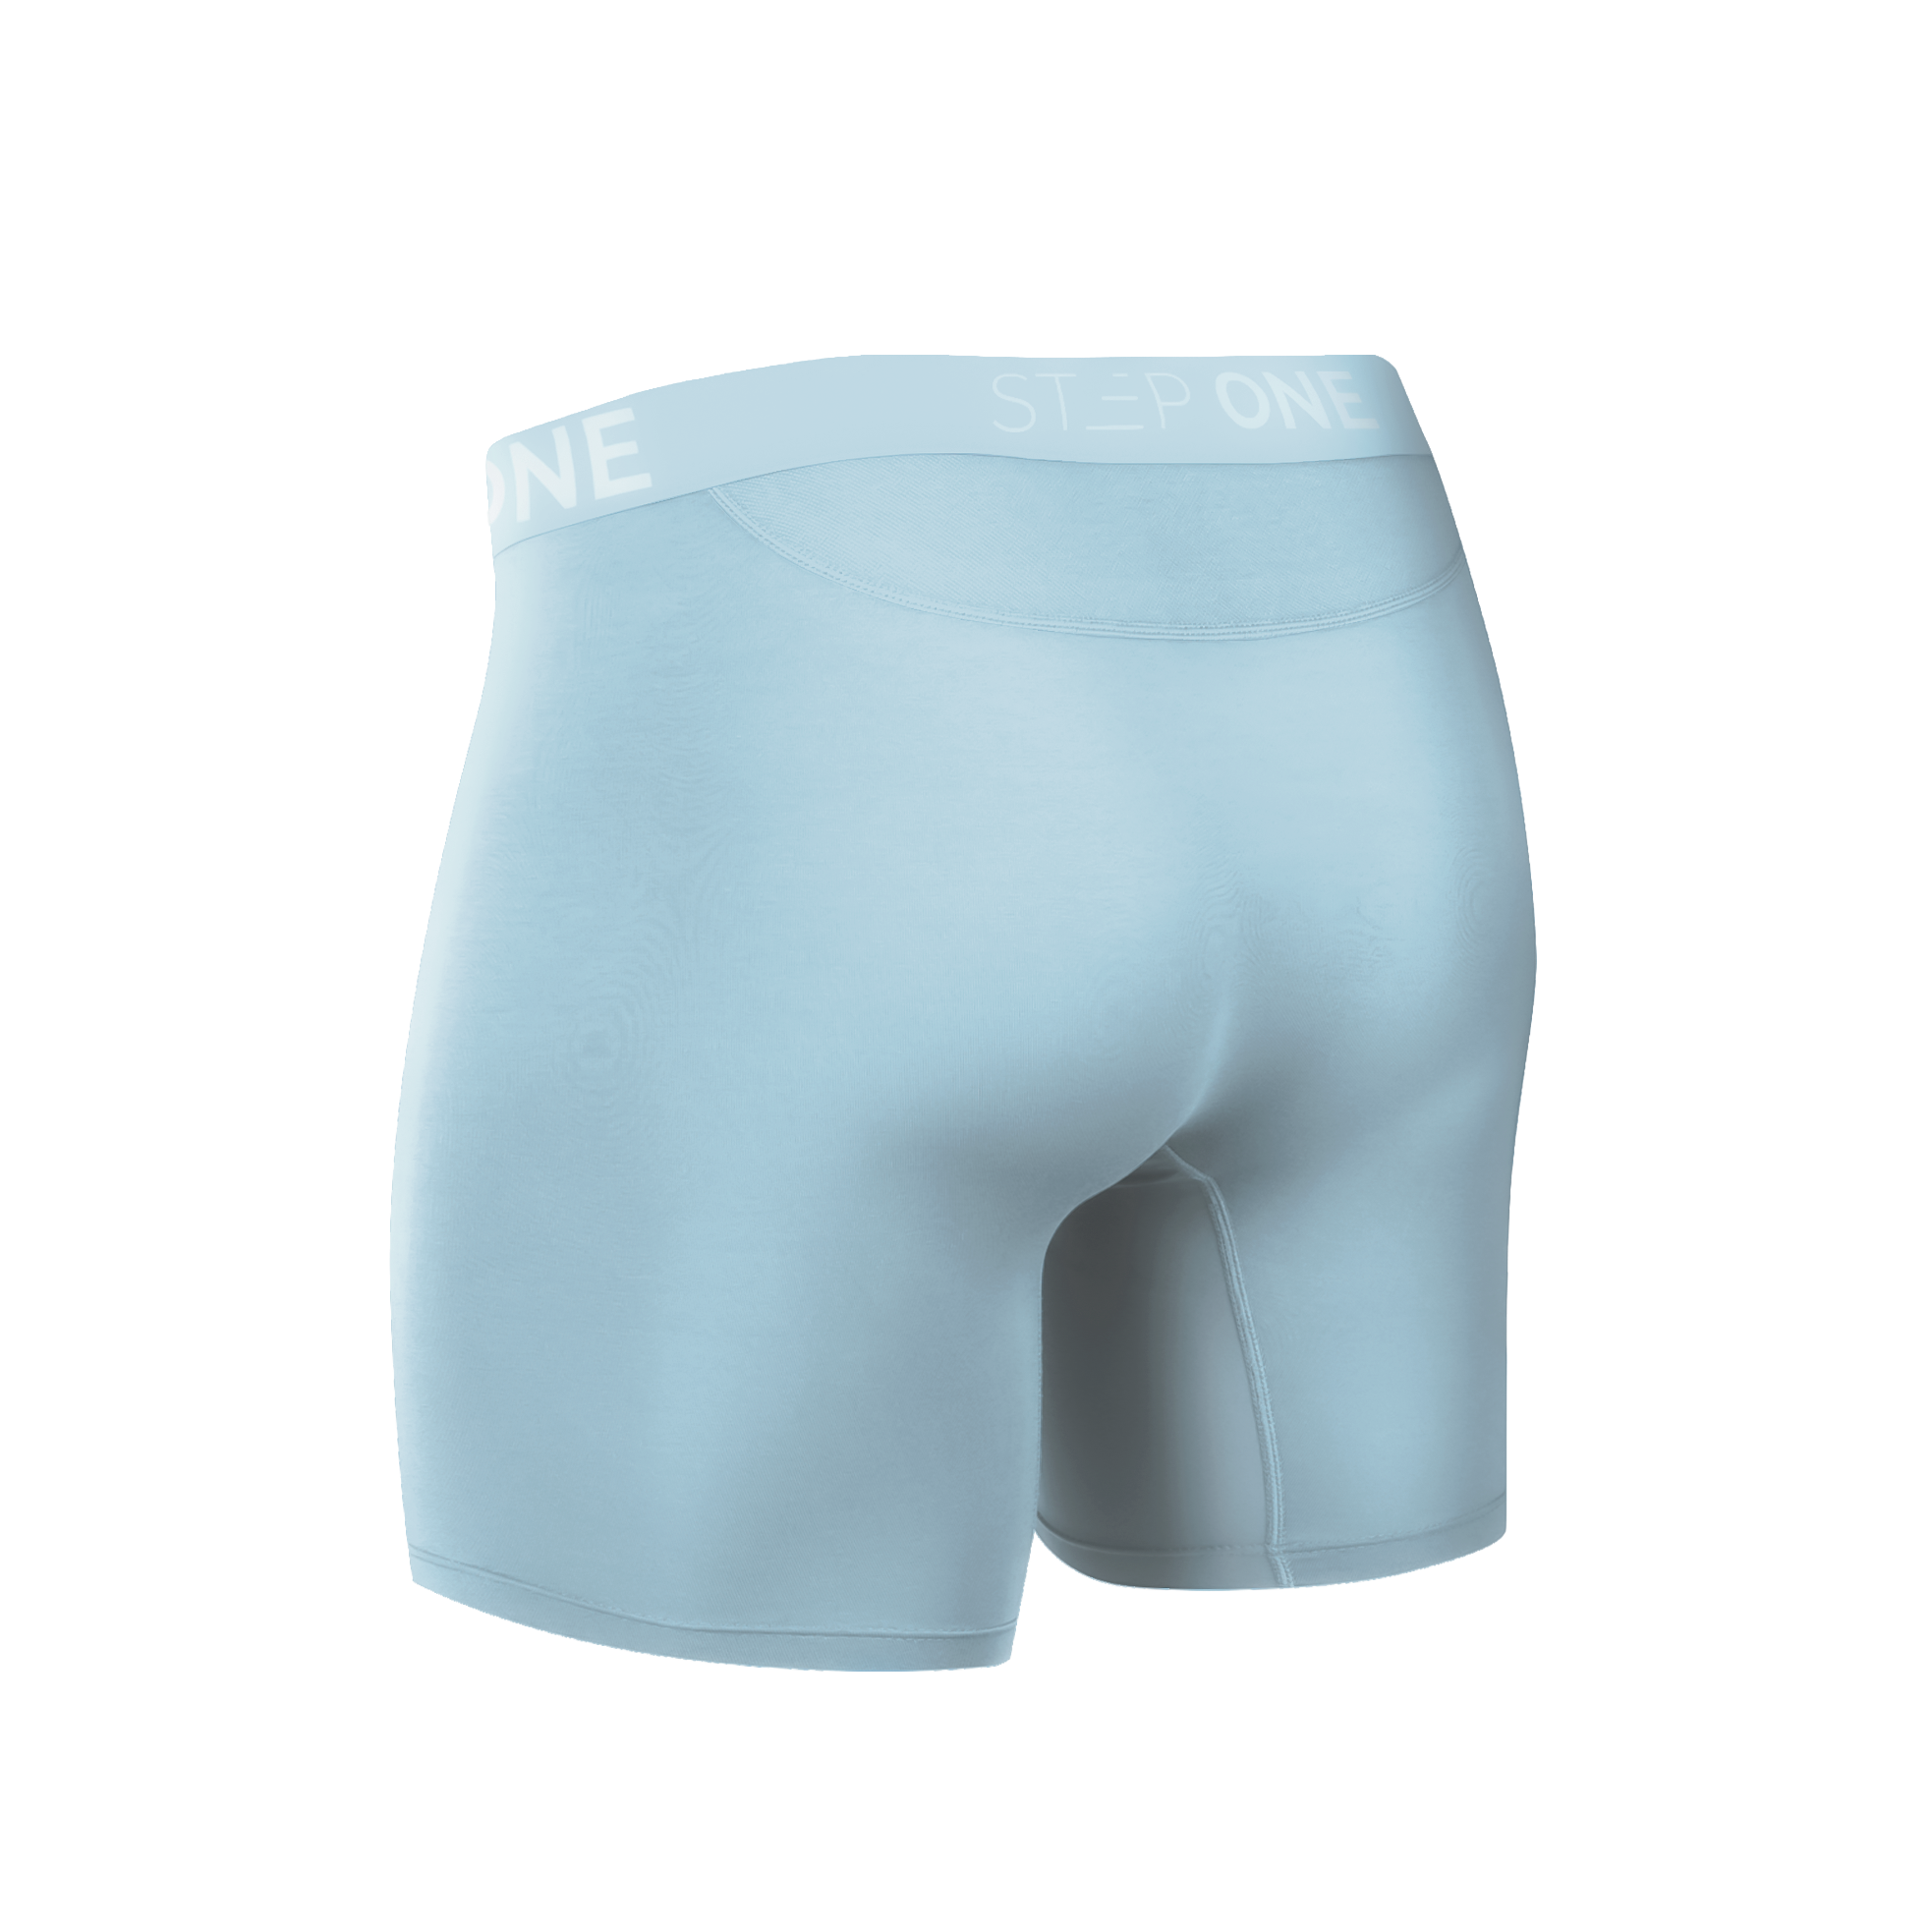 Boxer Brief Fly - Ice Cubes - View 2